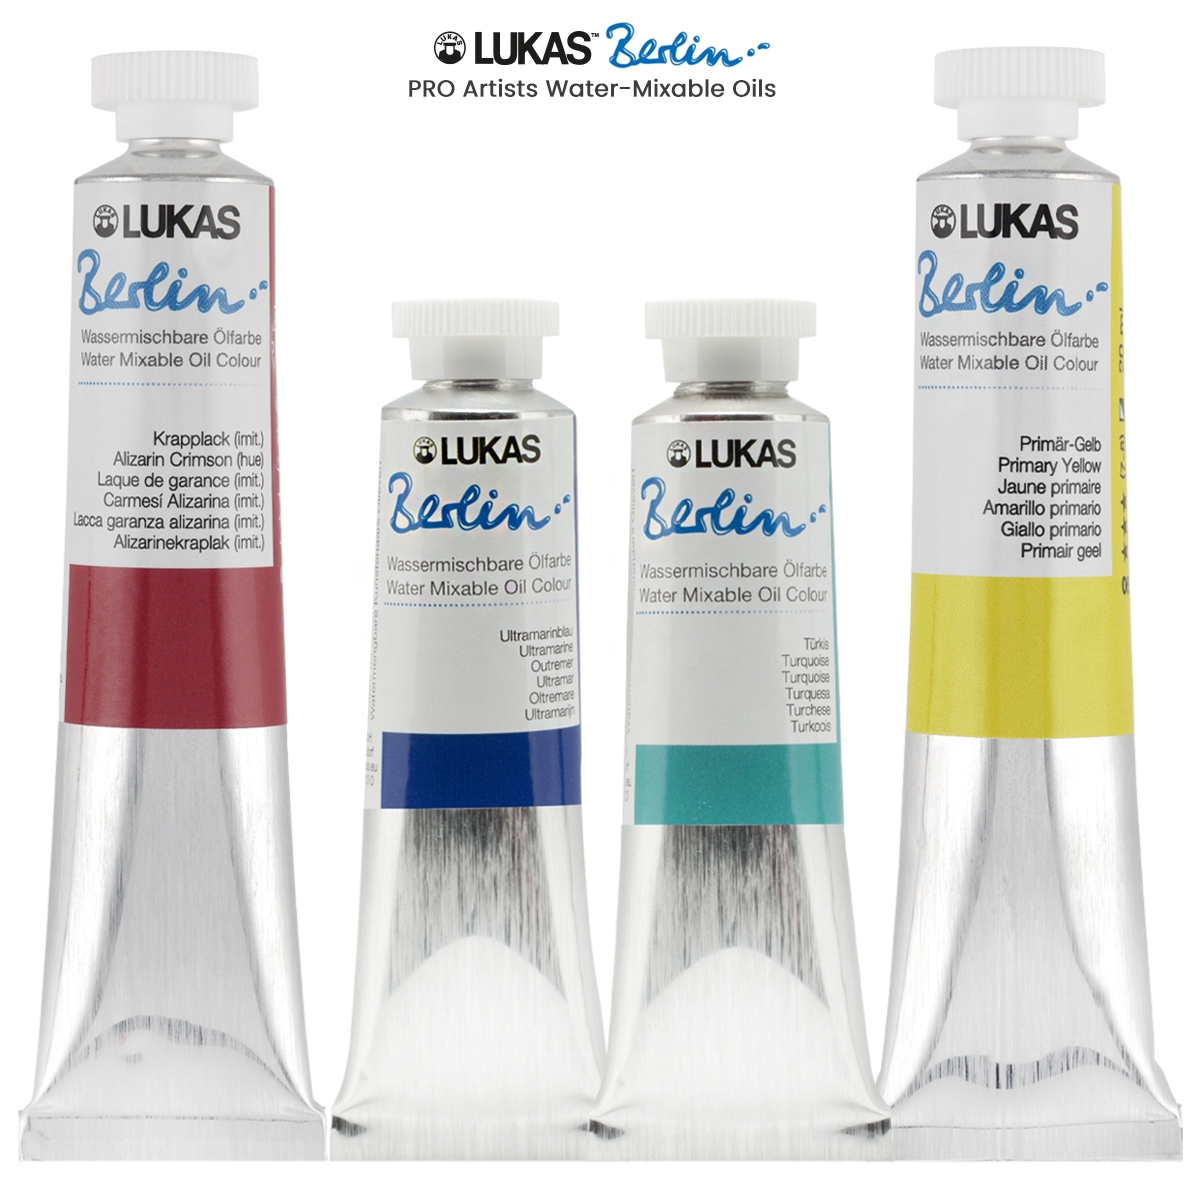 LUKAS Berlin PRO Artists Water Mixable Oil Paints